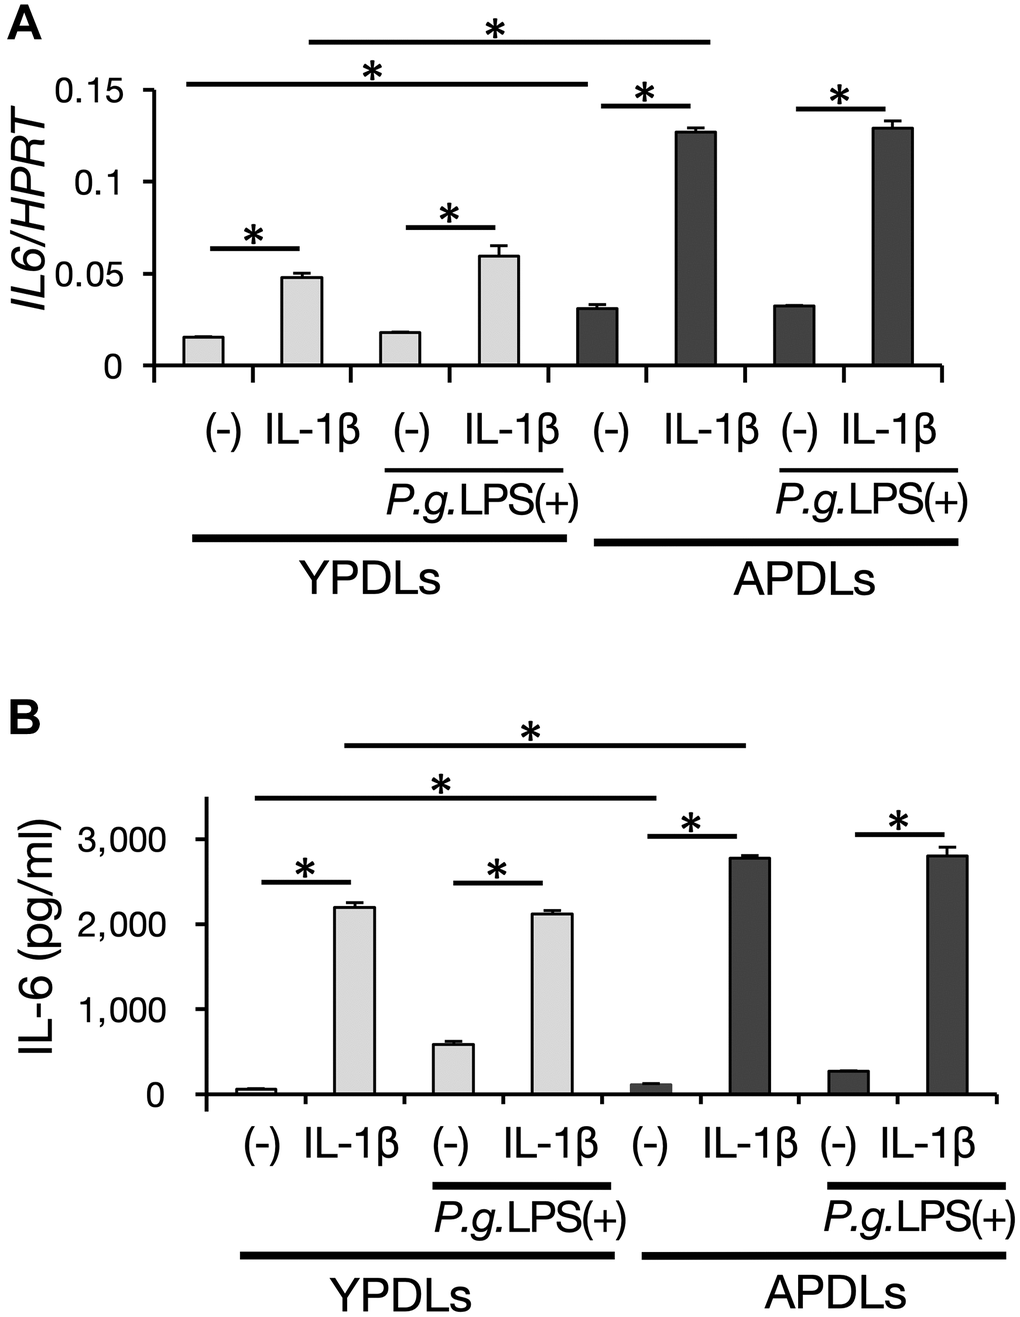 IL-6 production induced by proinflammatory cytokines and bacterial pathogens in senescent HPDL cells. (A) Relative mRNA expression of IL-6 stimulated by IL-1β (1 ng/ml) and P.g LPS (1 μg/ml) in YPDLs and APDLs quantified by qRT-PCR (*p B) IL-6 and IL-8 in conditioned medium of YPDLs and APDLs quantified by ELISA (*p 